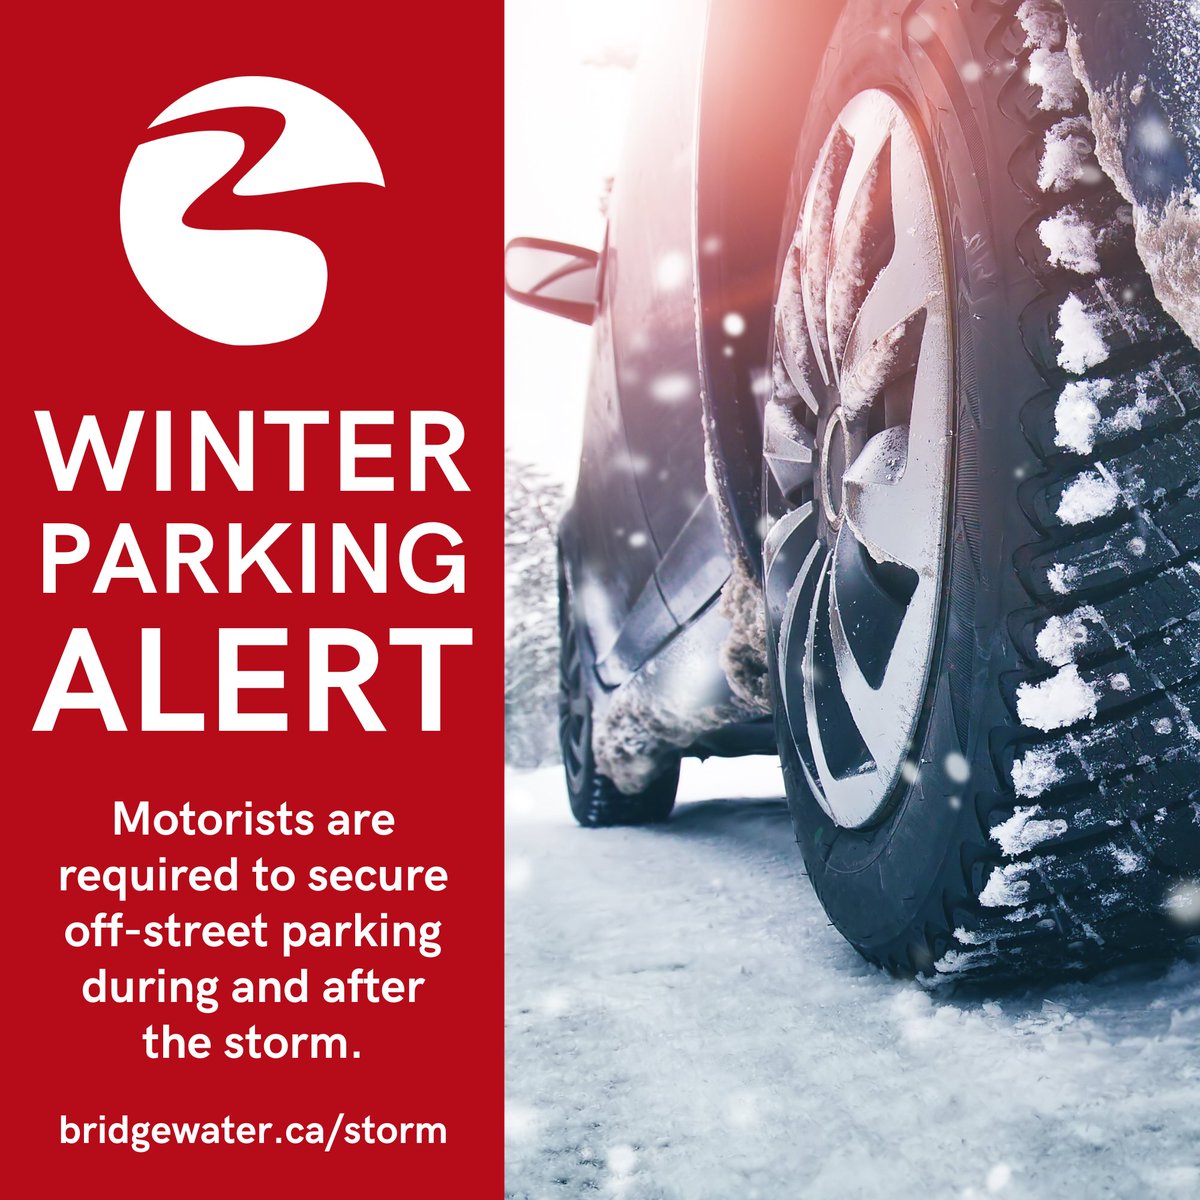 ❄️ STORM CENTRE > WINTER PARKING ALERT The Town of Bridgewater wishes to remind motorists that under Section 139 of the Motor Vehicle Act there is no parking permitted on streets during and after a winter storm. Parking a vehicle on the street will obstruct necessary winter ...